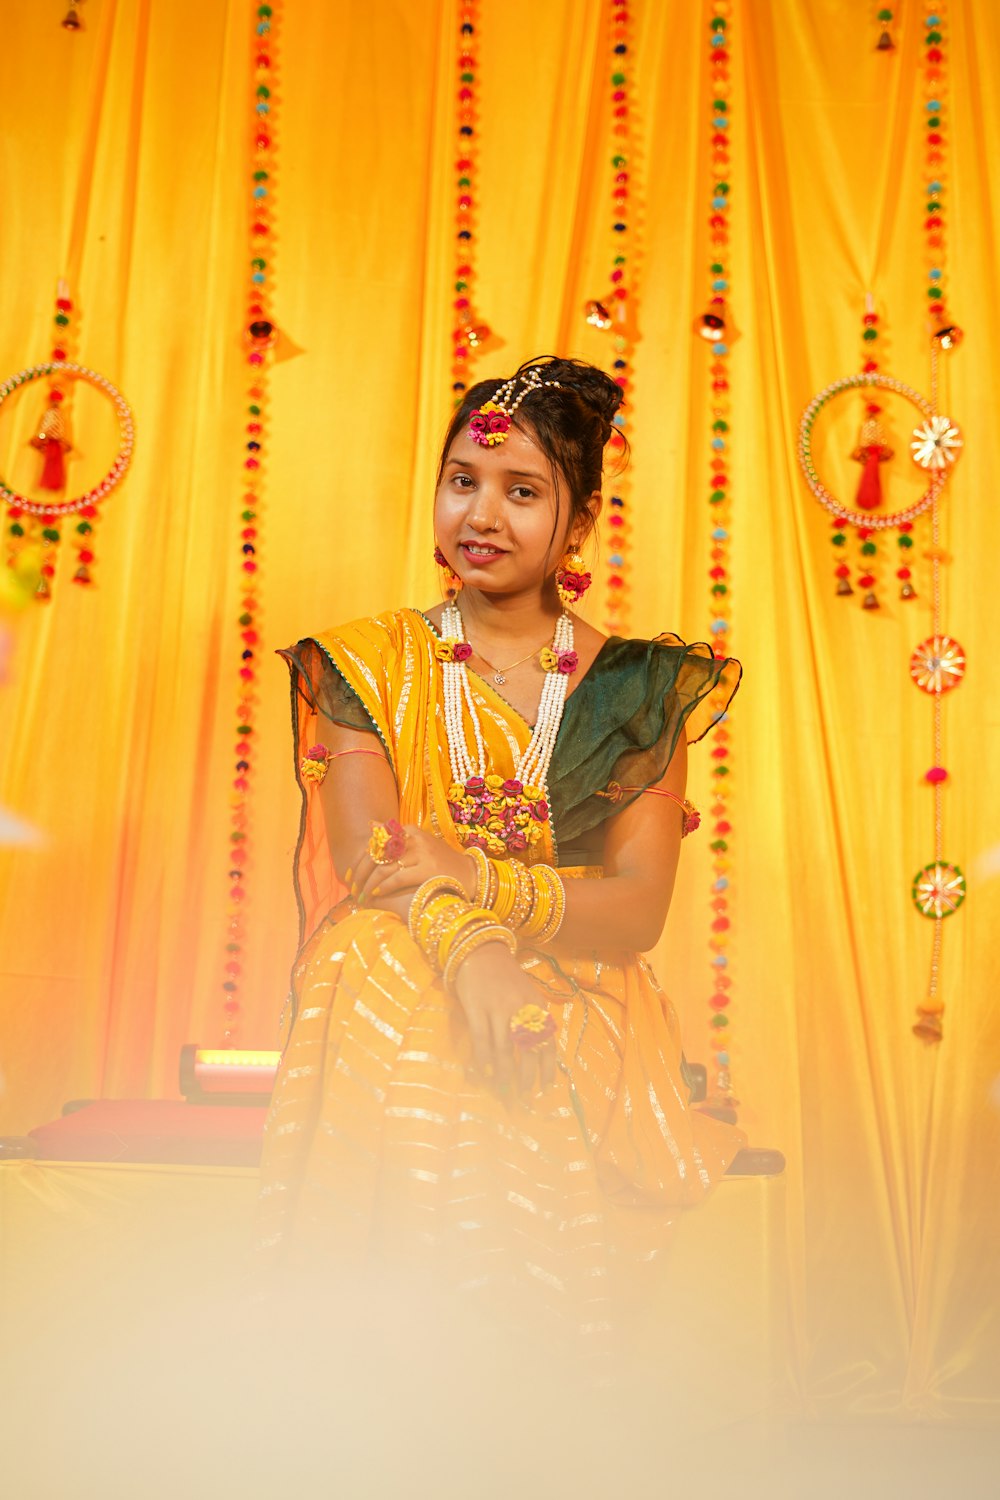 a young girl sitting in front of a yellow curtain